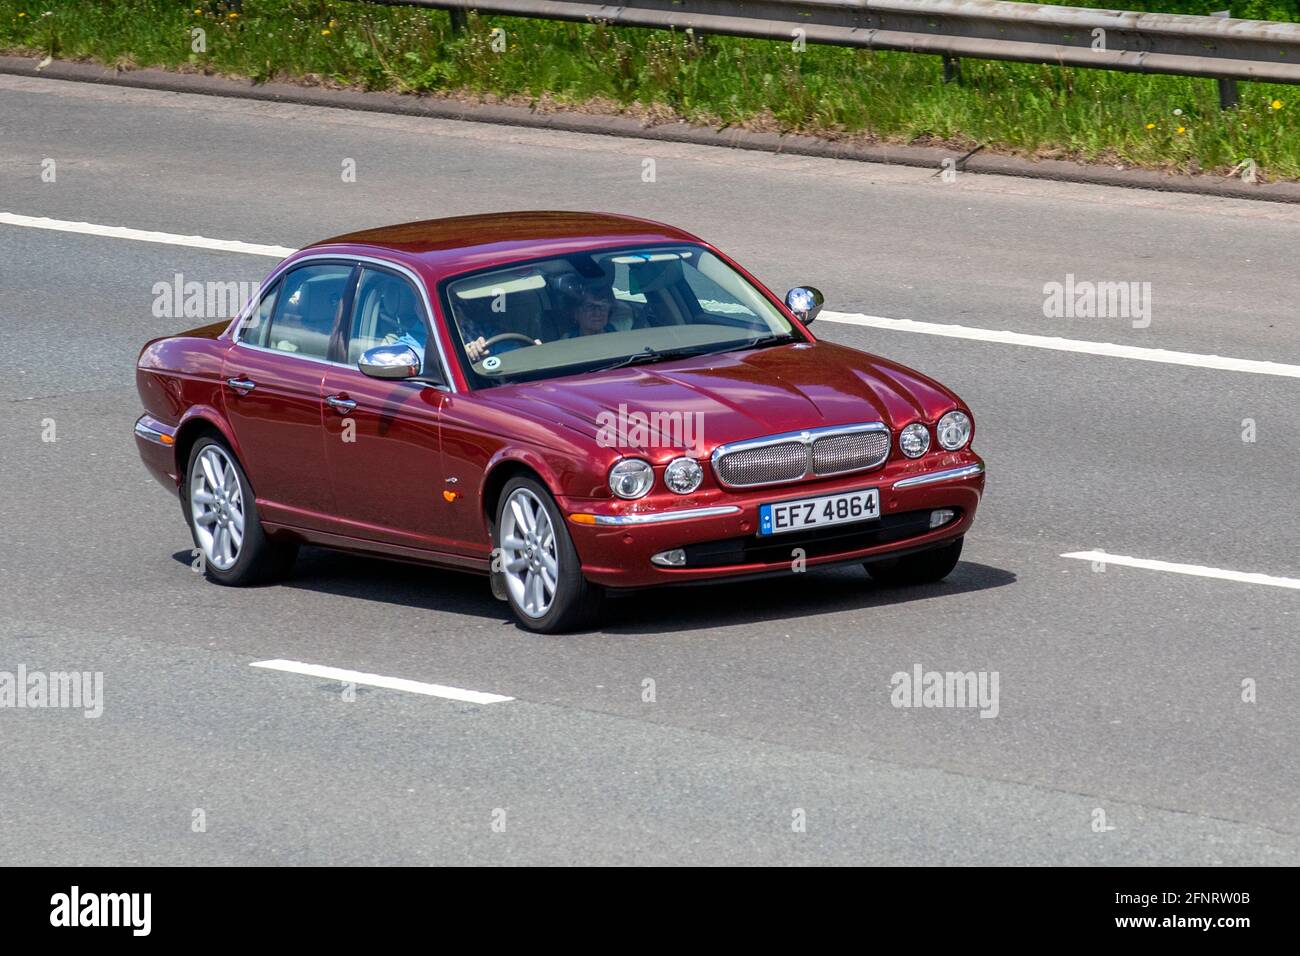 2007 red Jaguar XJ 2.7 TDVI SOVEREIGN 4d AUTO 206 BHP Saloon Diesel Automatic; Vehicular traffic, moving vehicles, cars, vehicle driving on UK roads, motors, motoring on the M6 motorway highway UK road network. Stock Photo